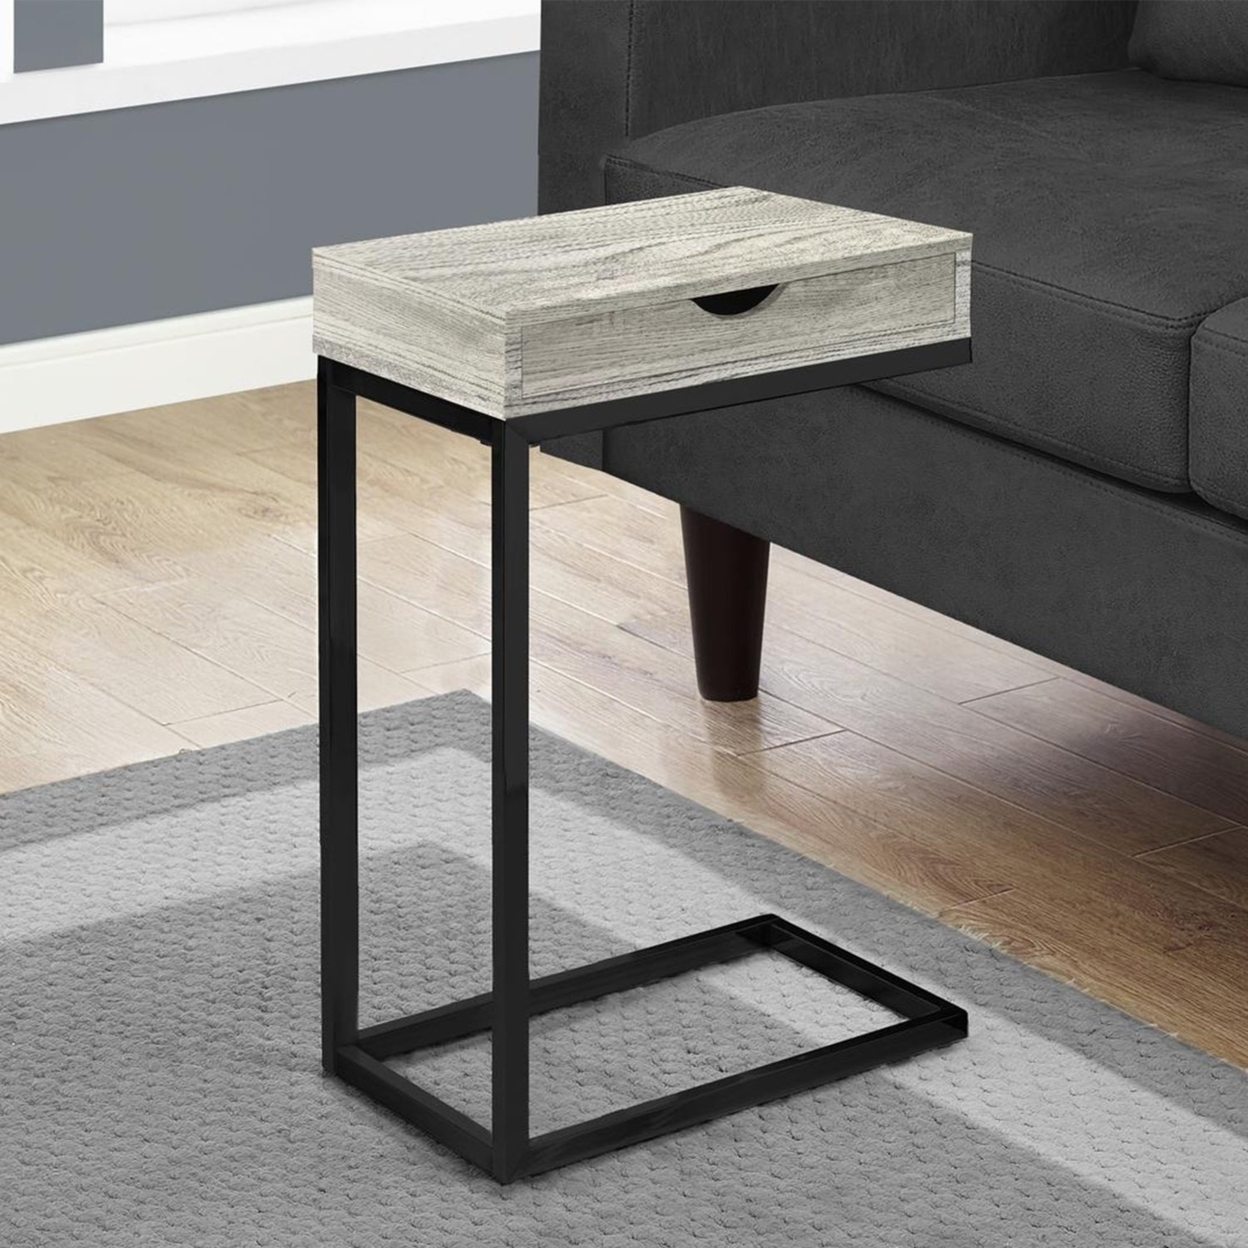 10.25" x 15.75" x 24.5" Grey Finish and Laminated Metal Accent Table - Grey,Black